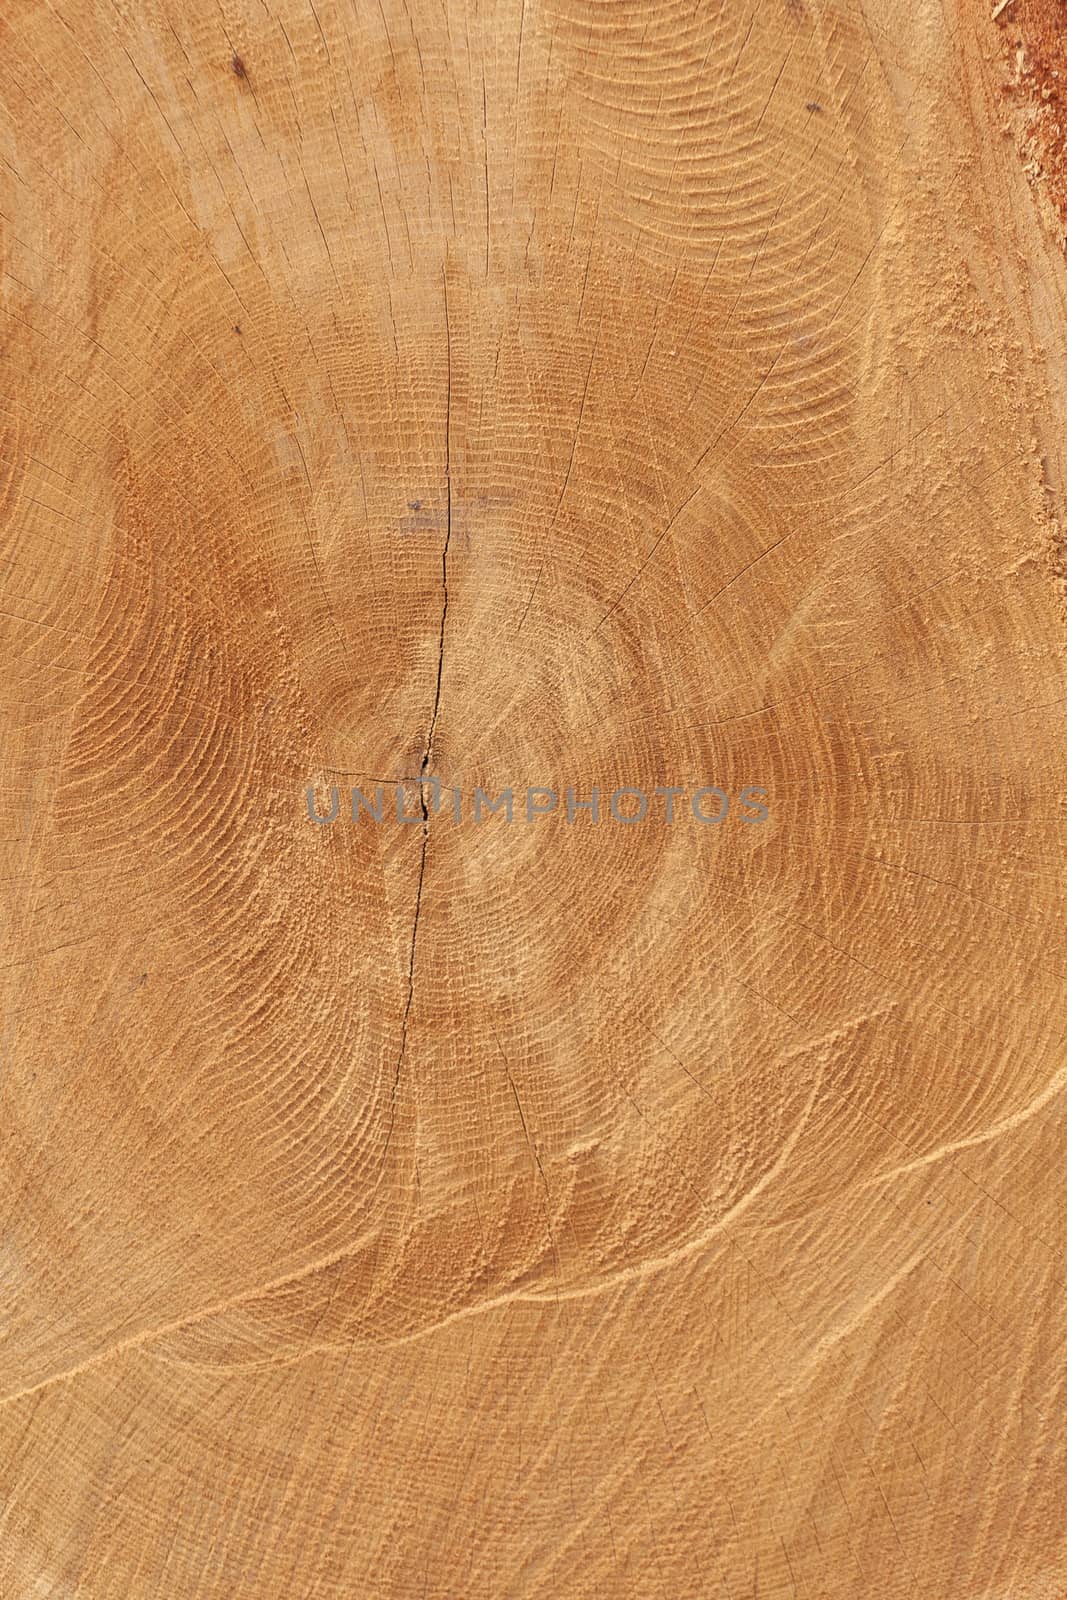 Texture of freshly cut wood. A tree with cracks and age circles.